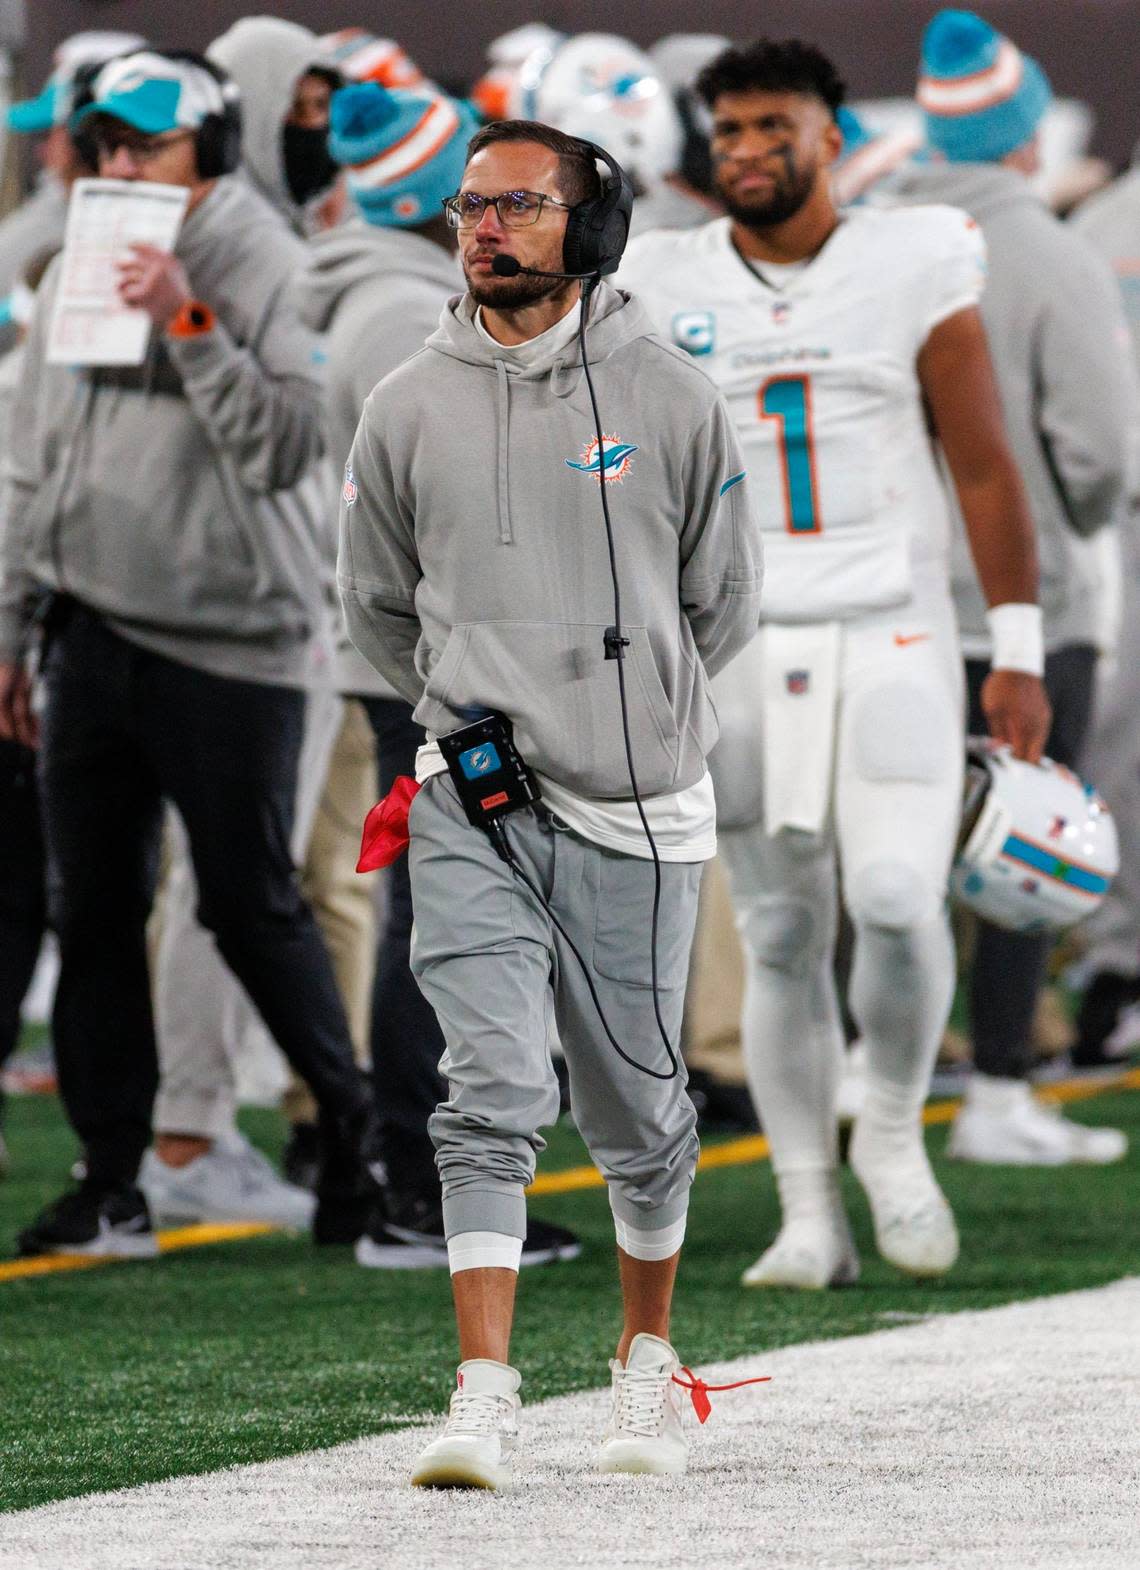 Miami Dolphins head coach Mike McDaniel’s more relaxed attire on game day does not distract from one of the top teams in the NFL.